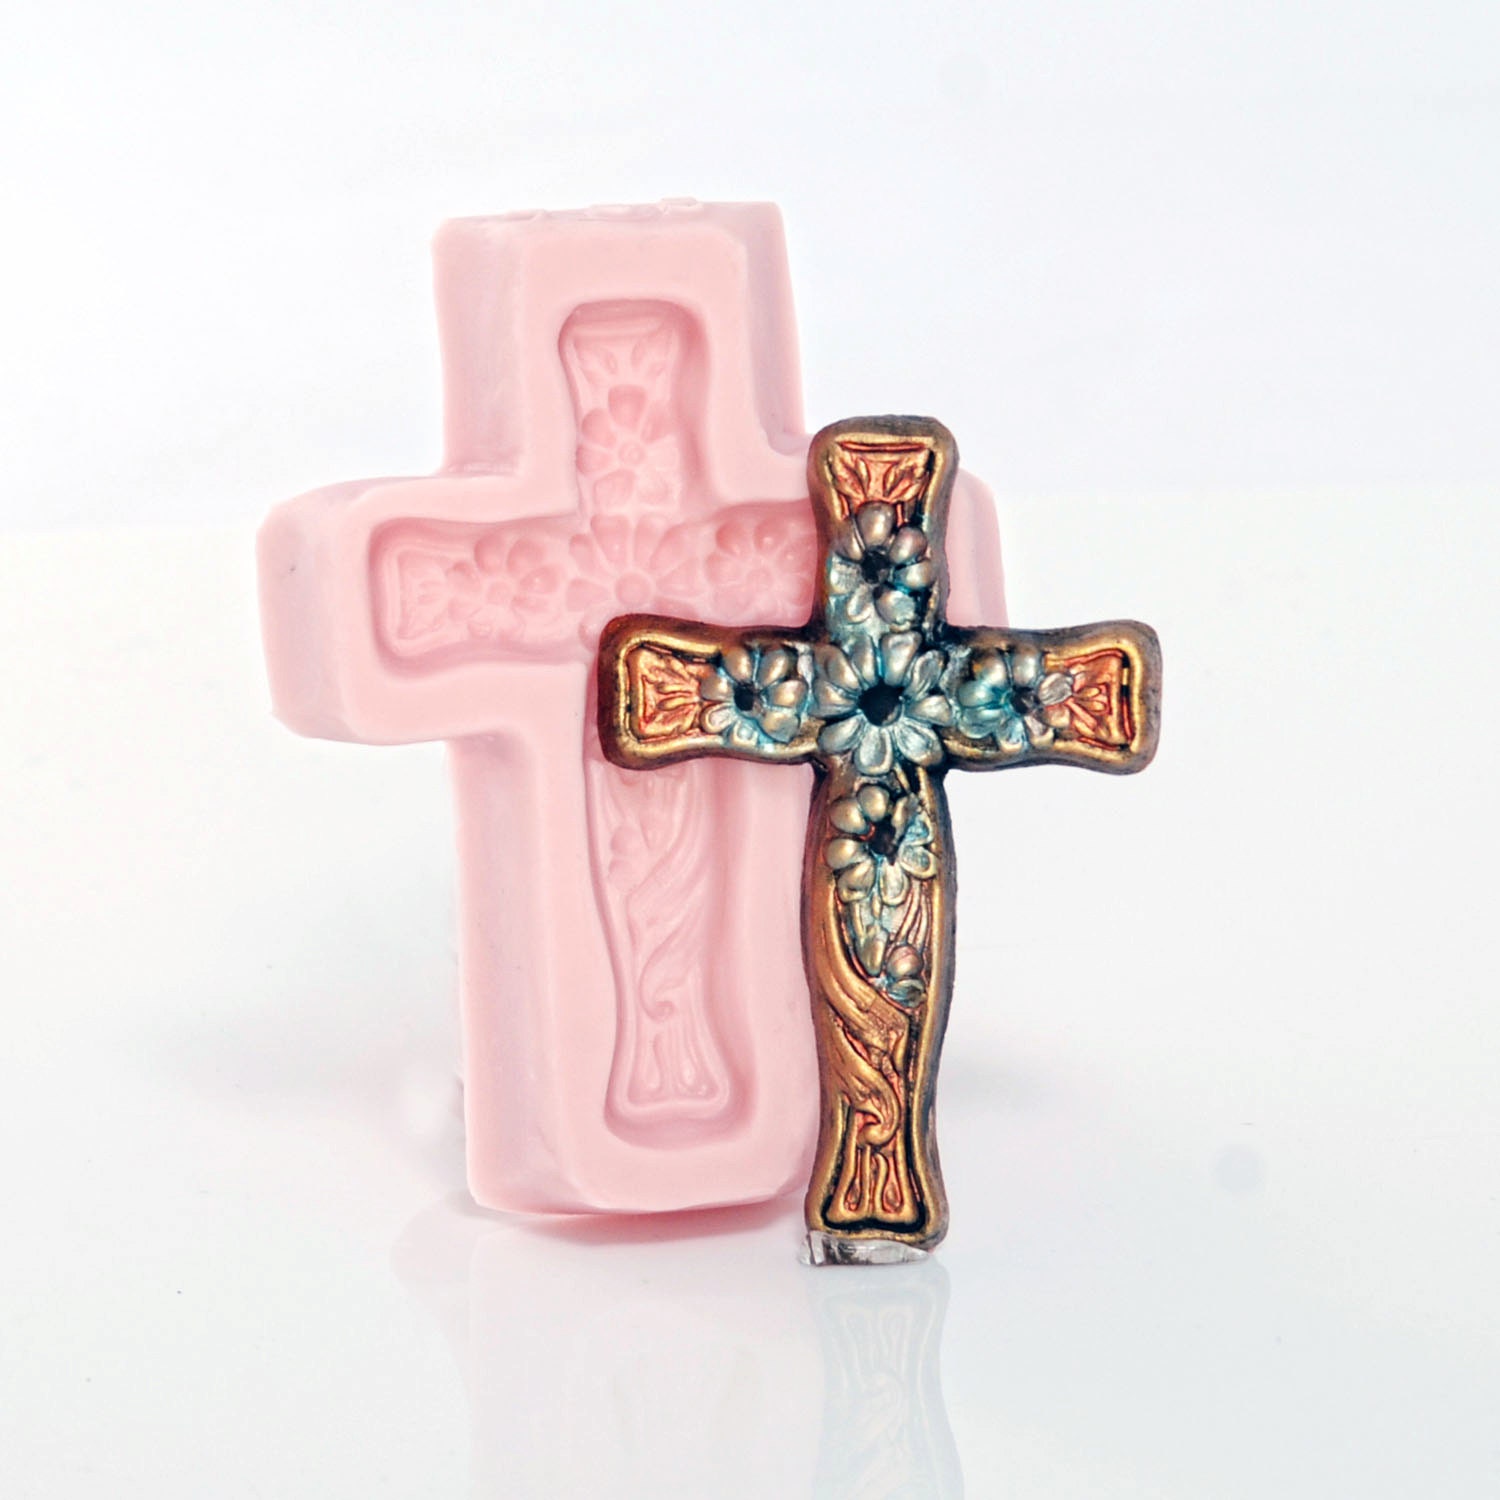 Silicone Cross Mold Mould for Fondant Gum Paste Chocolate